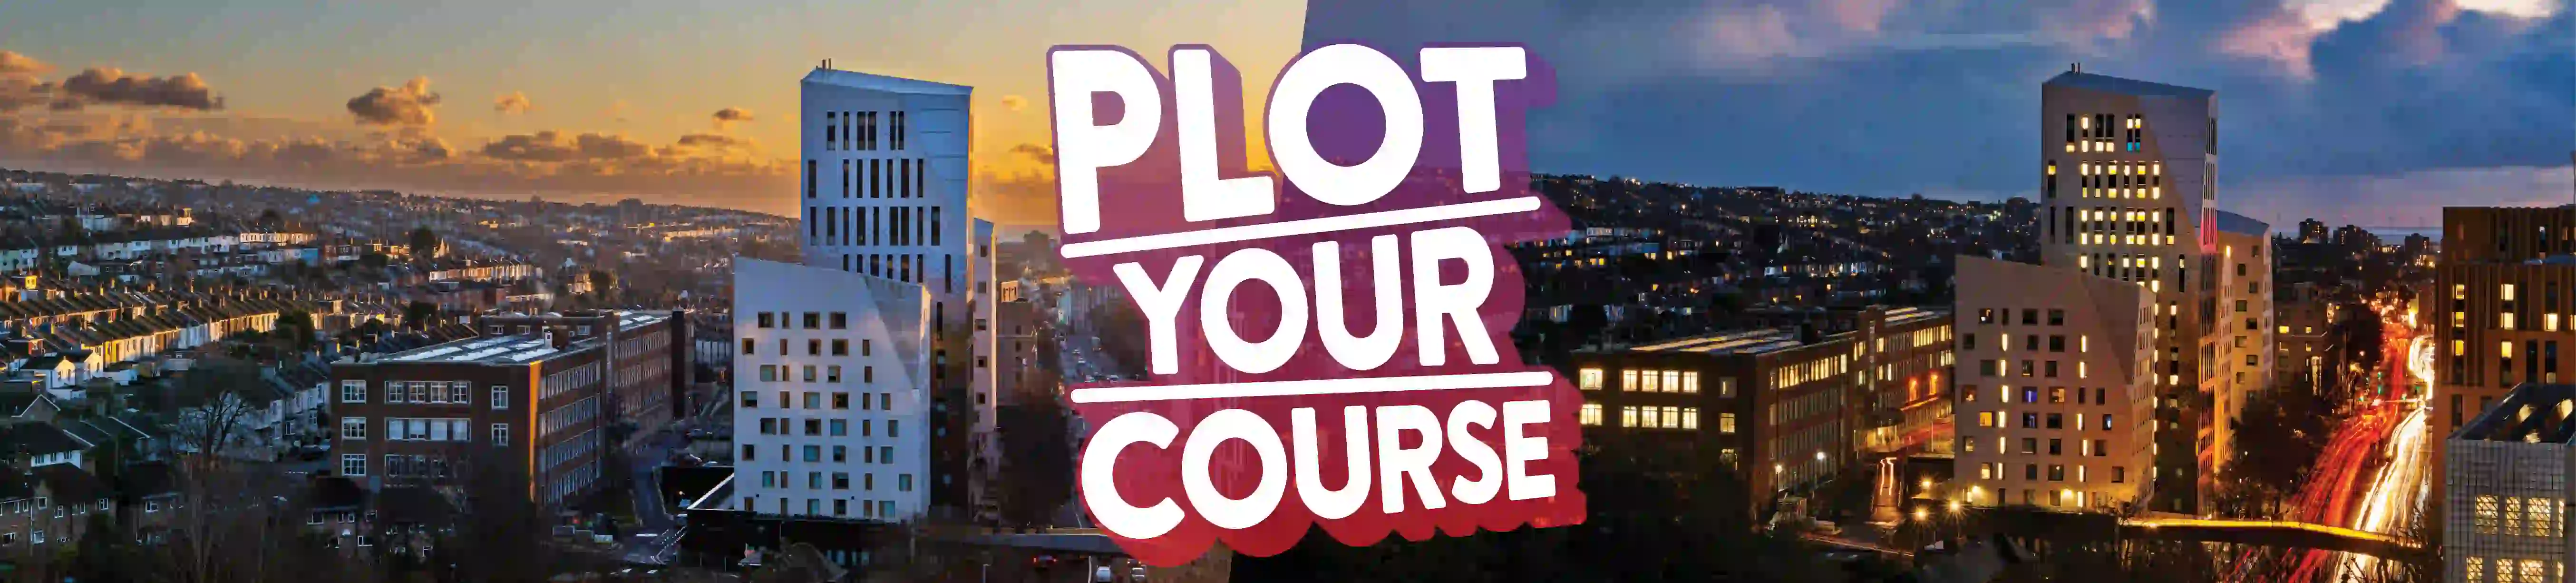 Photo composite showing Moulsecoomb halls of residence in the day and at night with the text 'Plot your course'